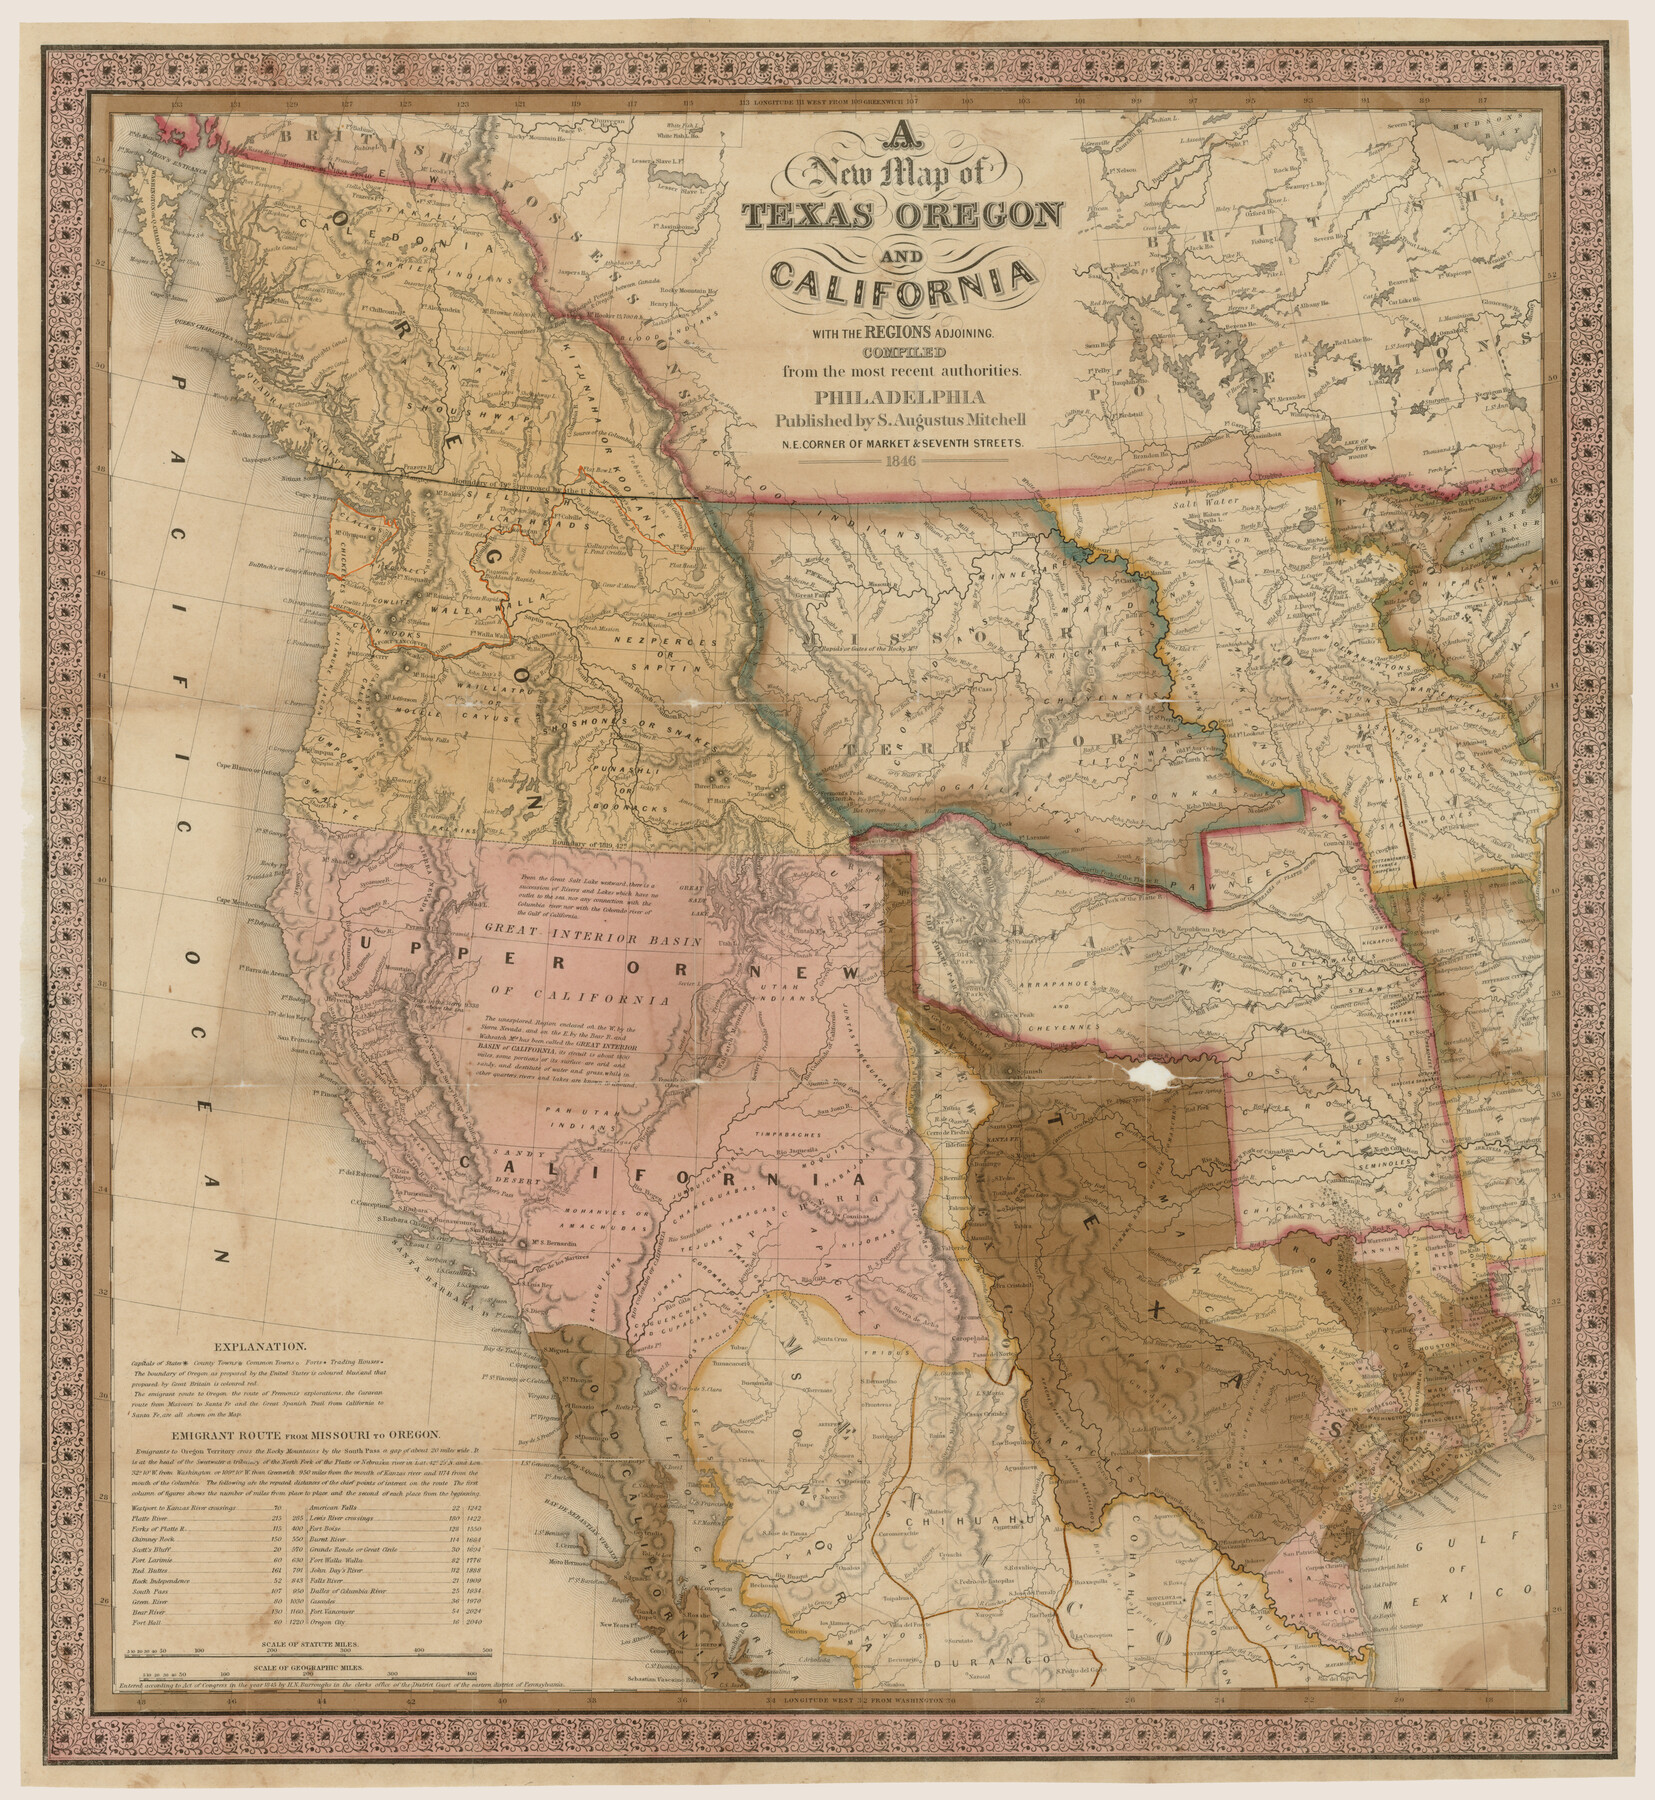 93940, A new map of Texas, Oregon and California with the regions adjoining, compiled from the most recent authorities, Rees-Jones Digital Map Collection